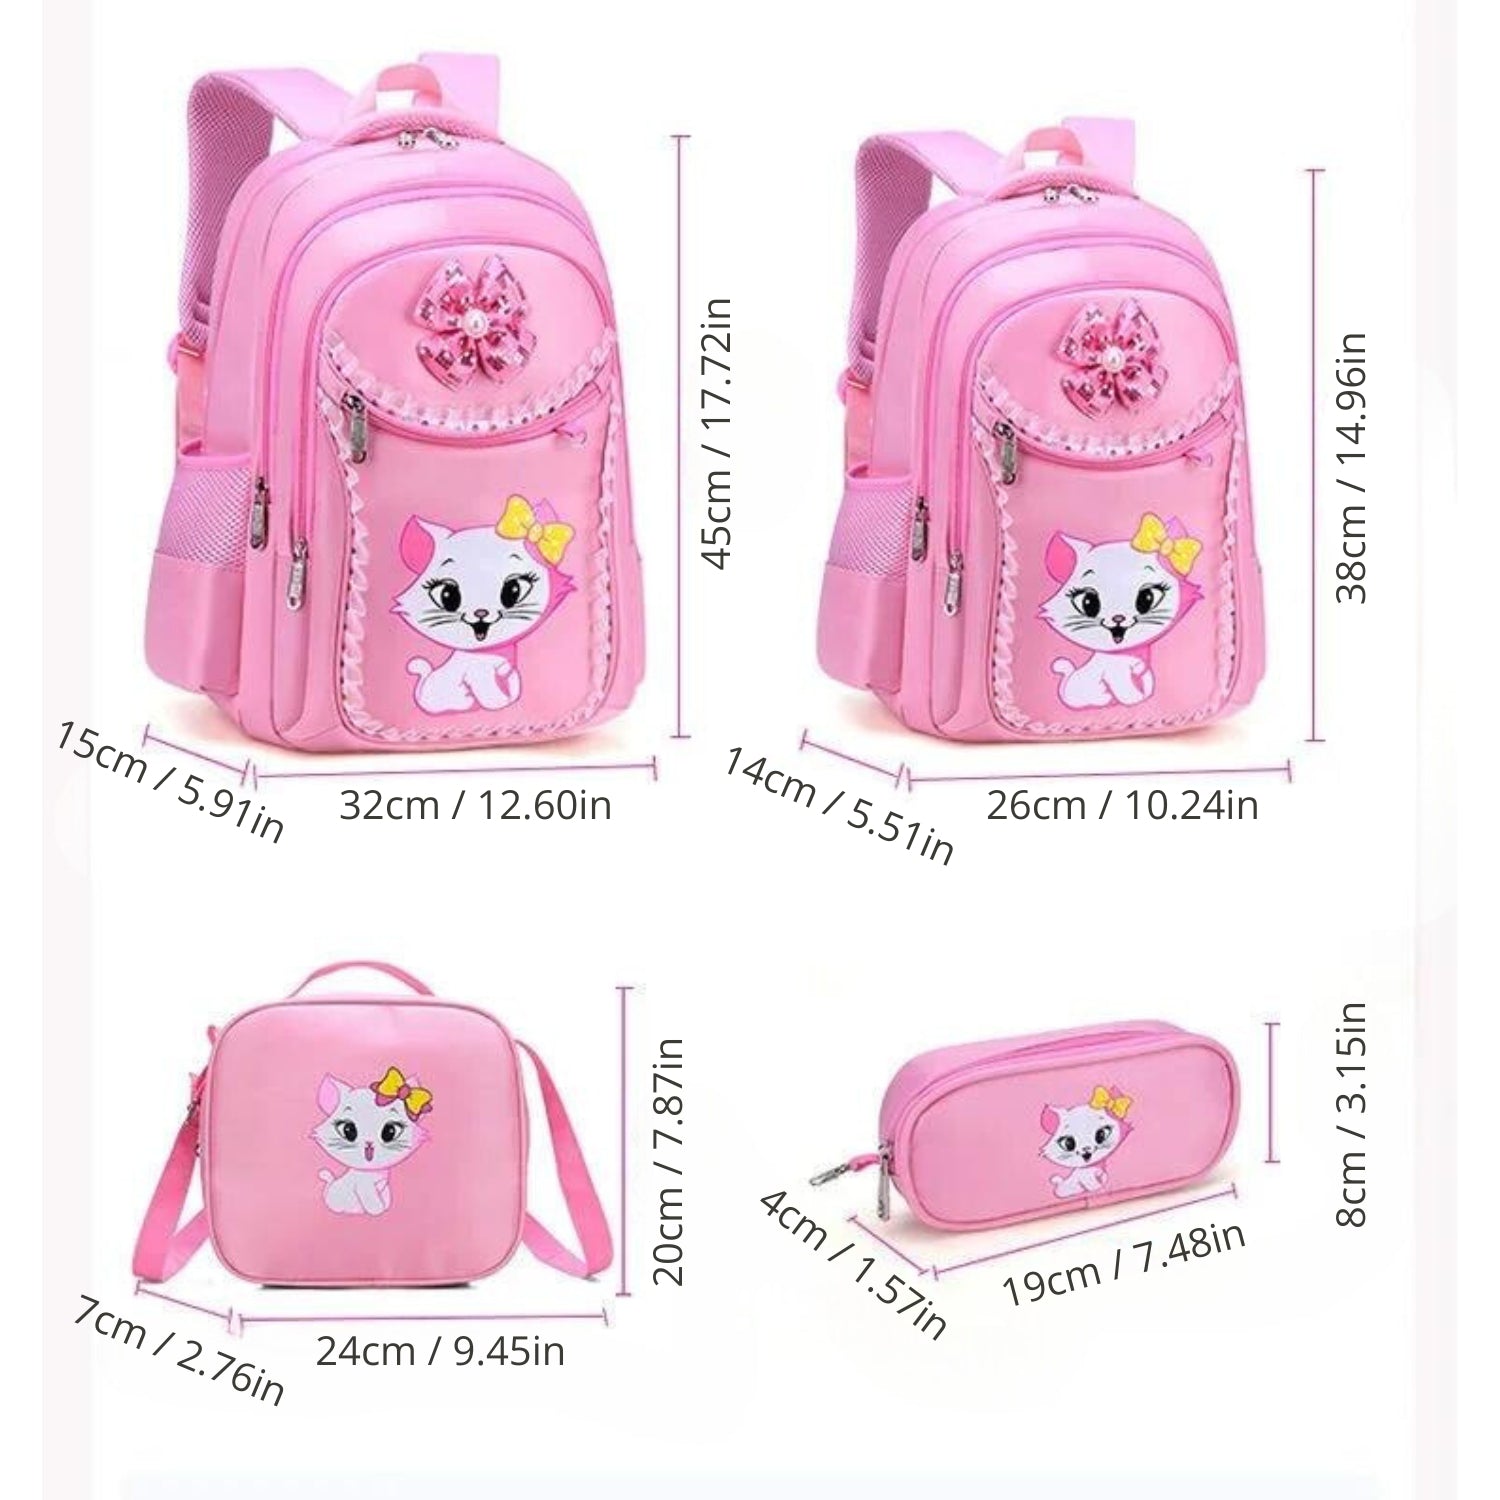 Cute Pink School Backpack For Girl Student Teenagers School Bag Set Children Backpack With Pencil case